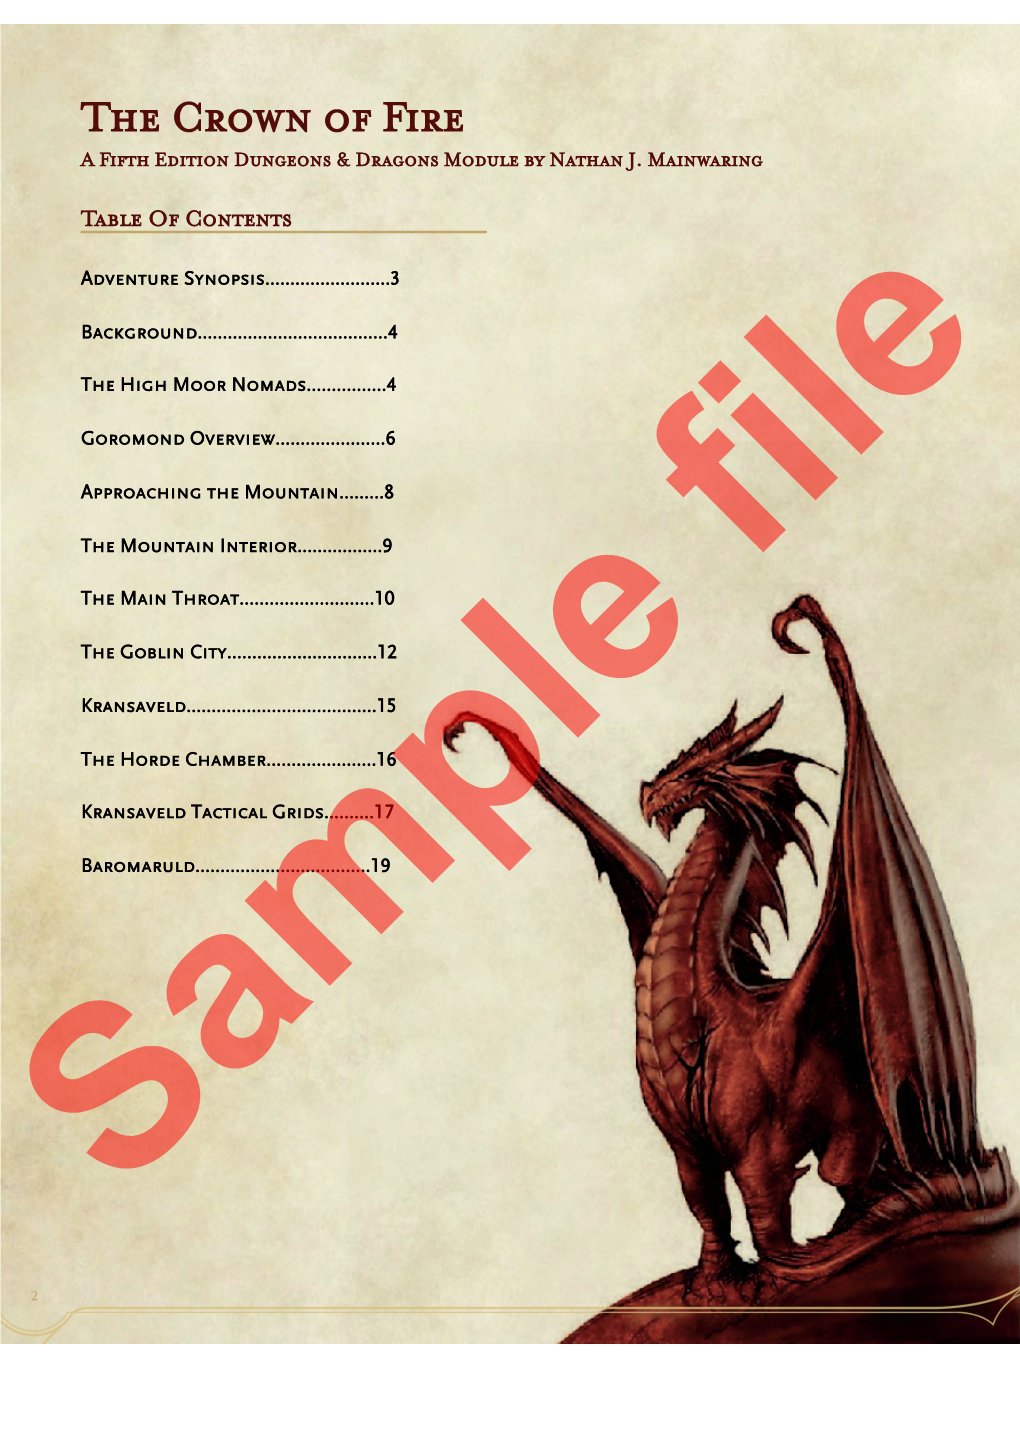 The Crown of Fire a Fifth Edition Dungeons & Dragons Module by Nathan J